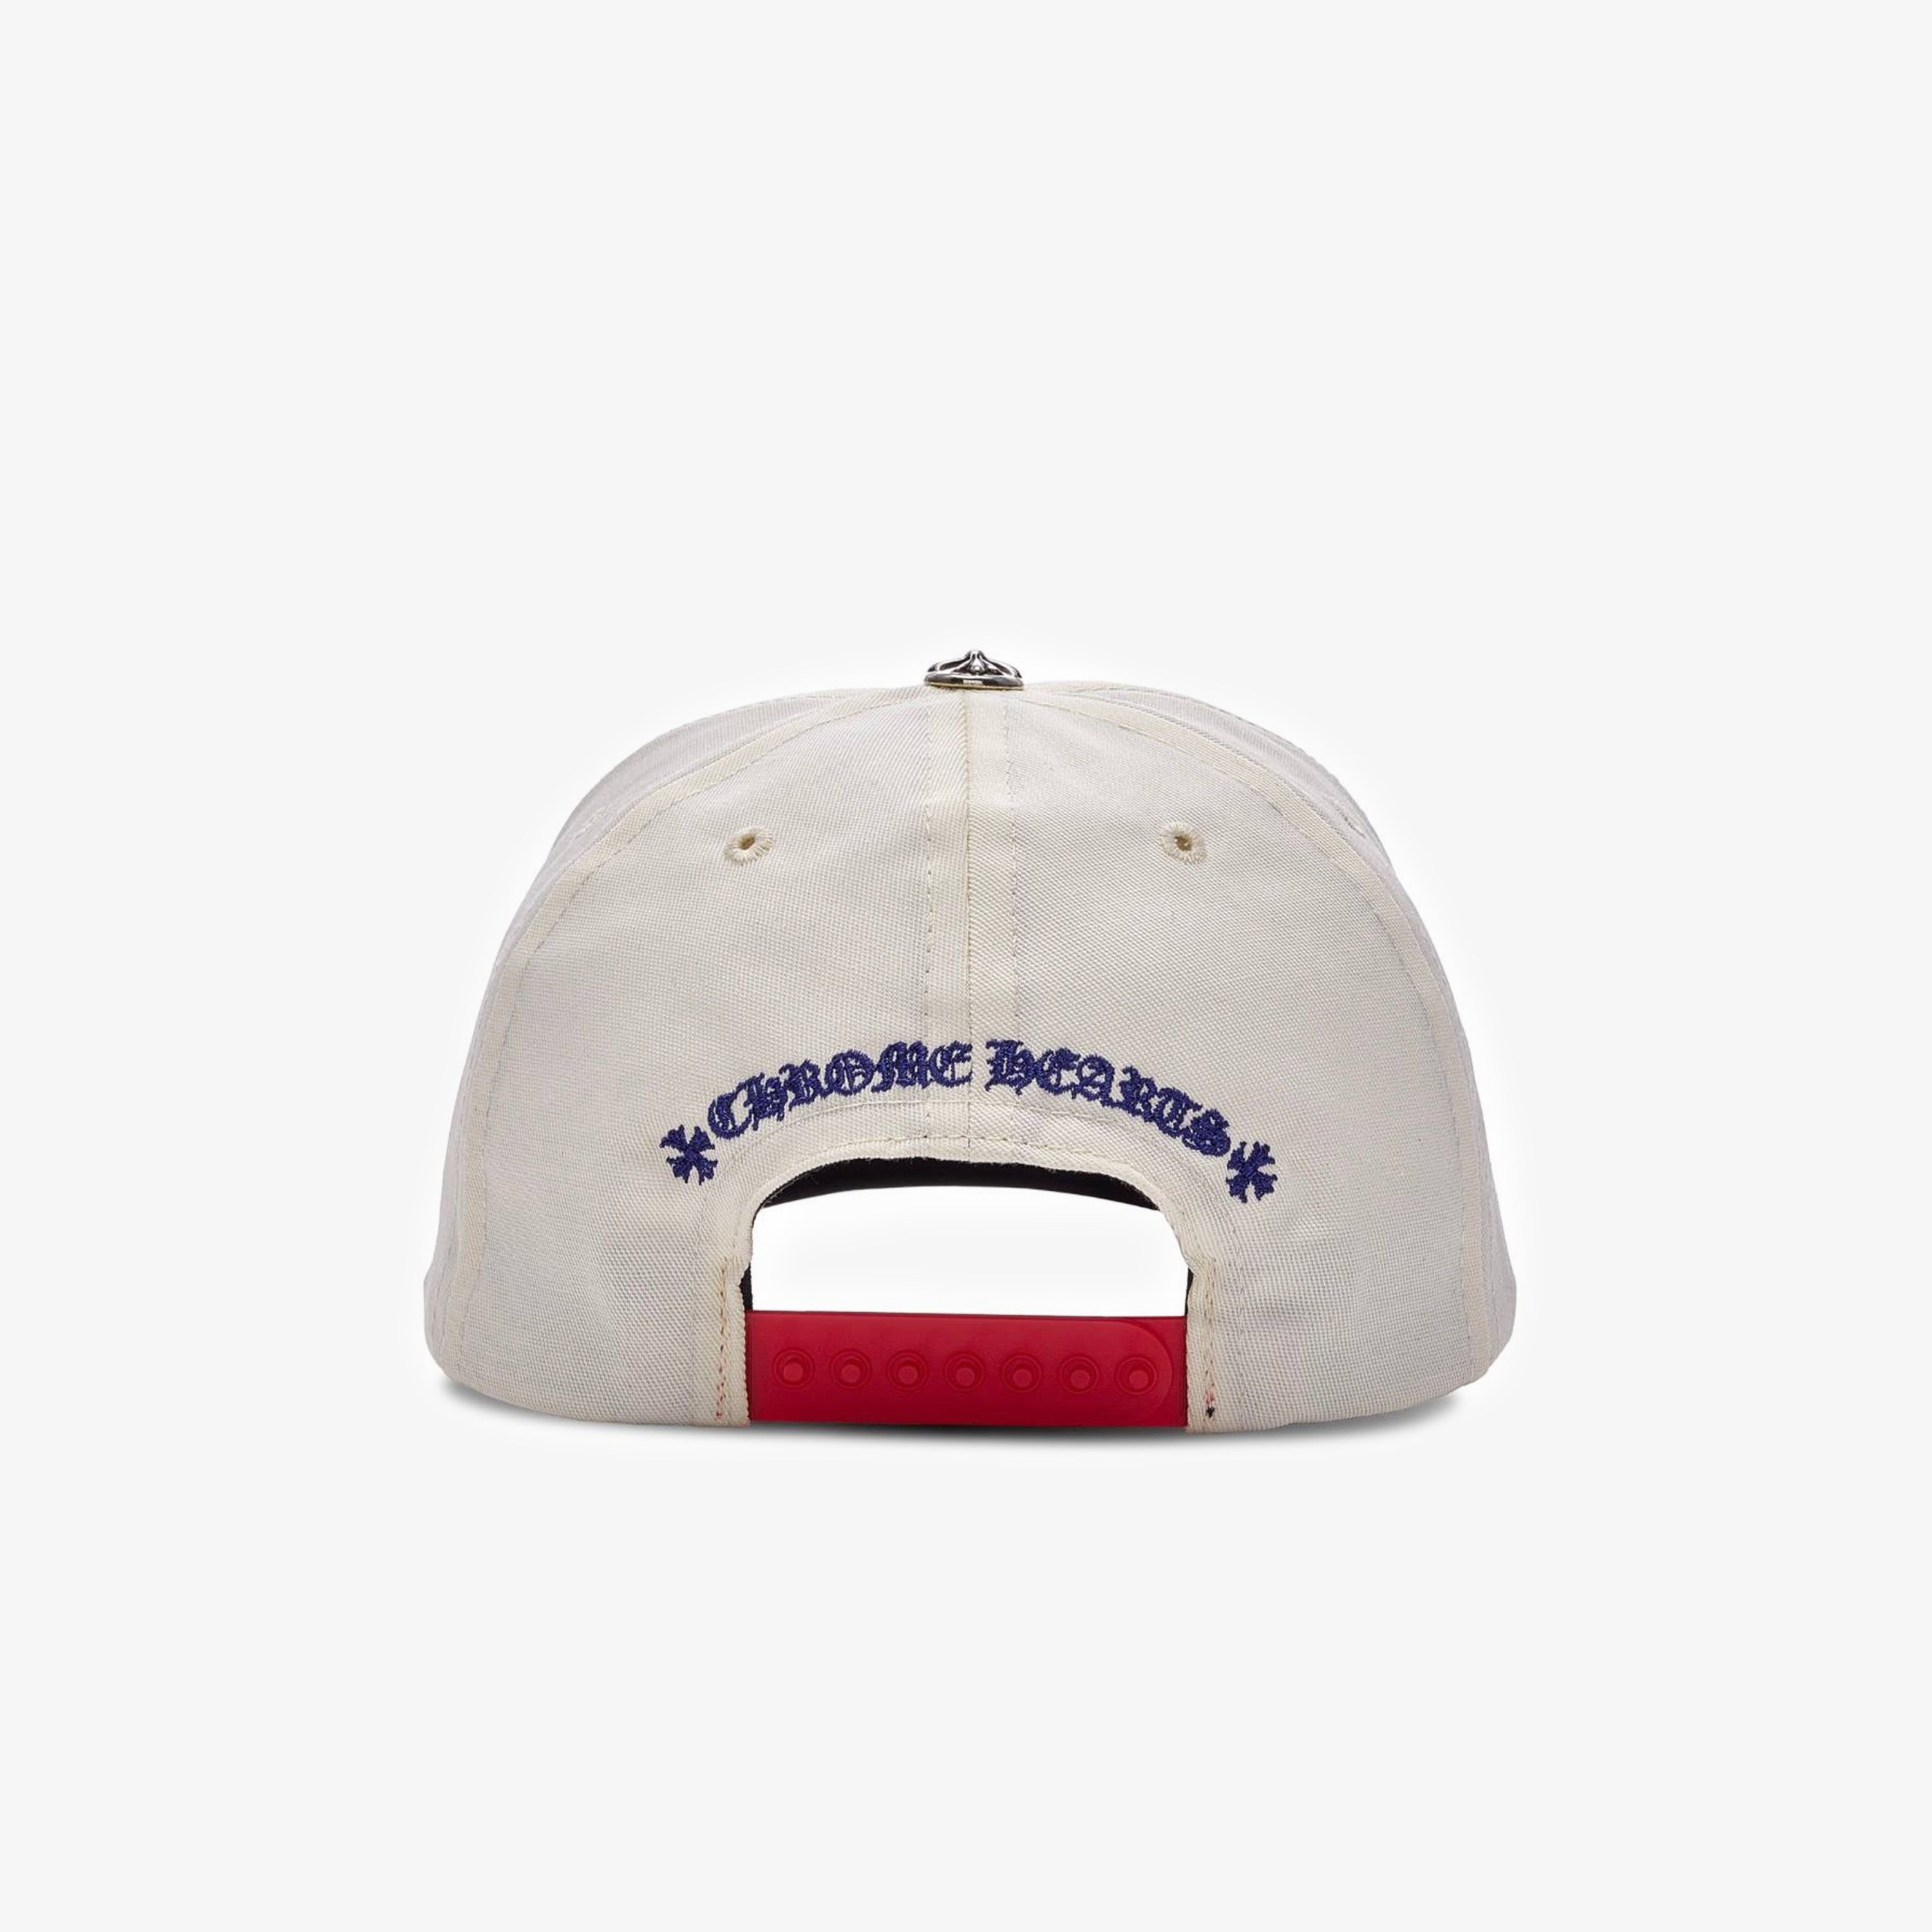 4TH OF JULY EXCLUSIVE BASEBALL HAT